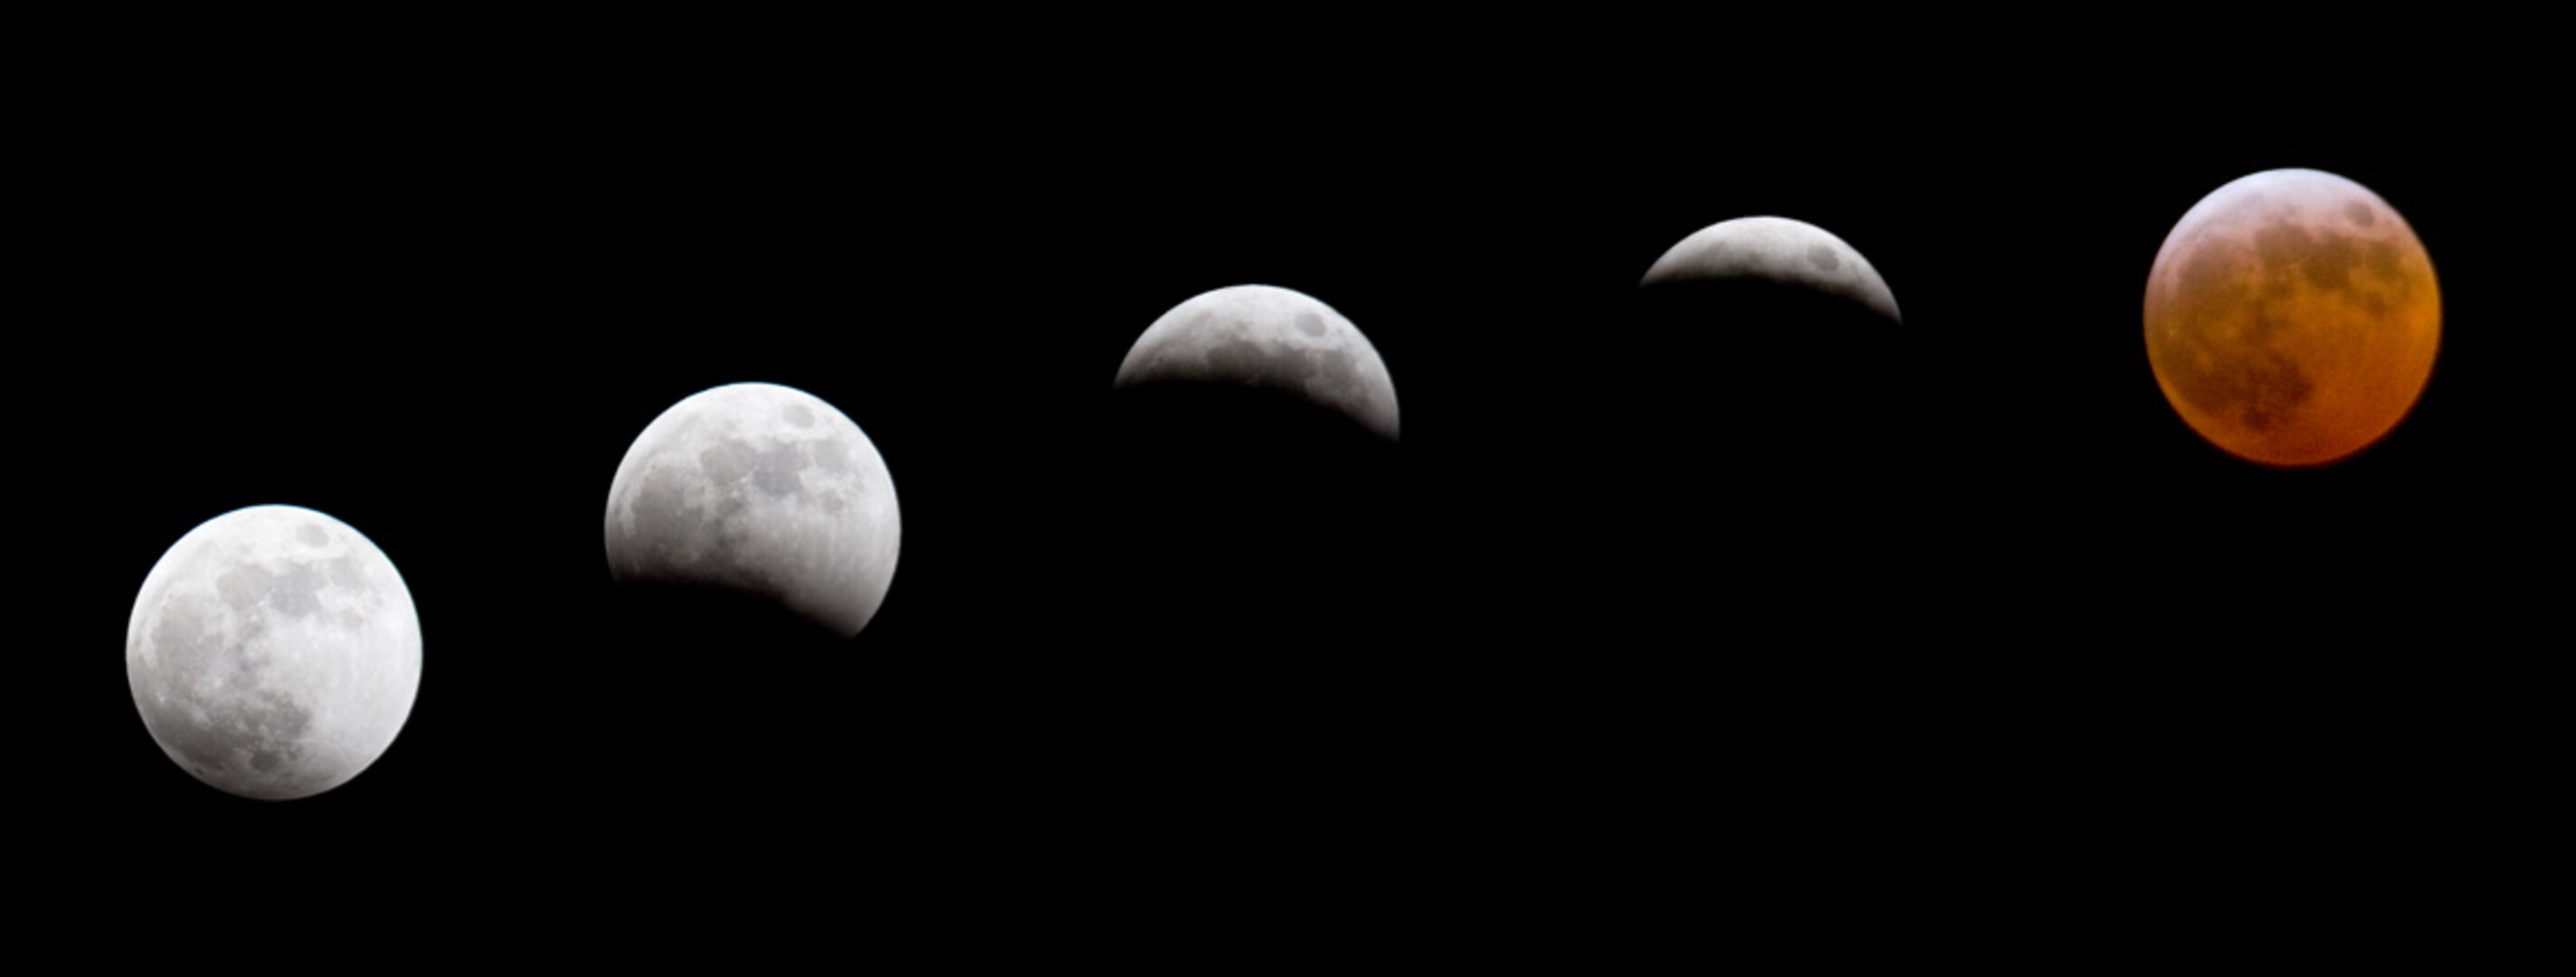 The different stages of the lunar eclipse